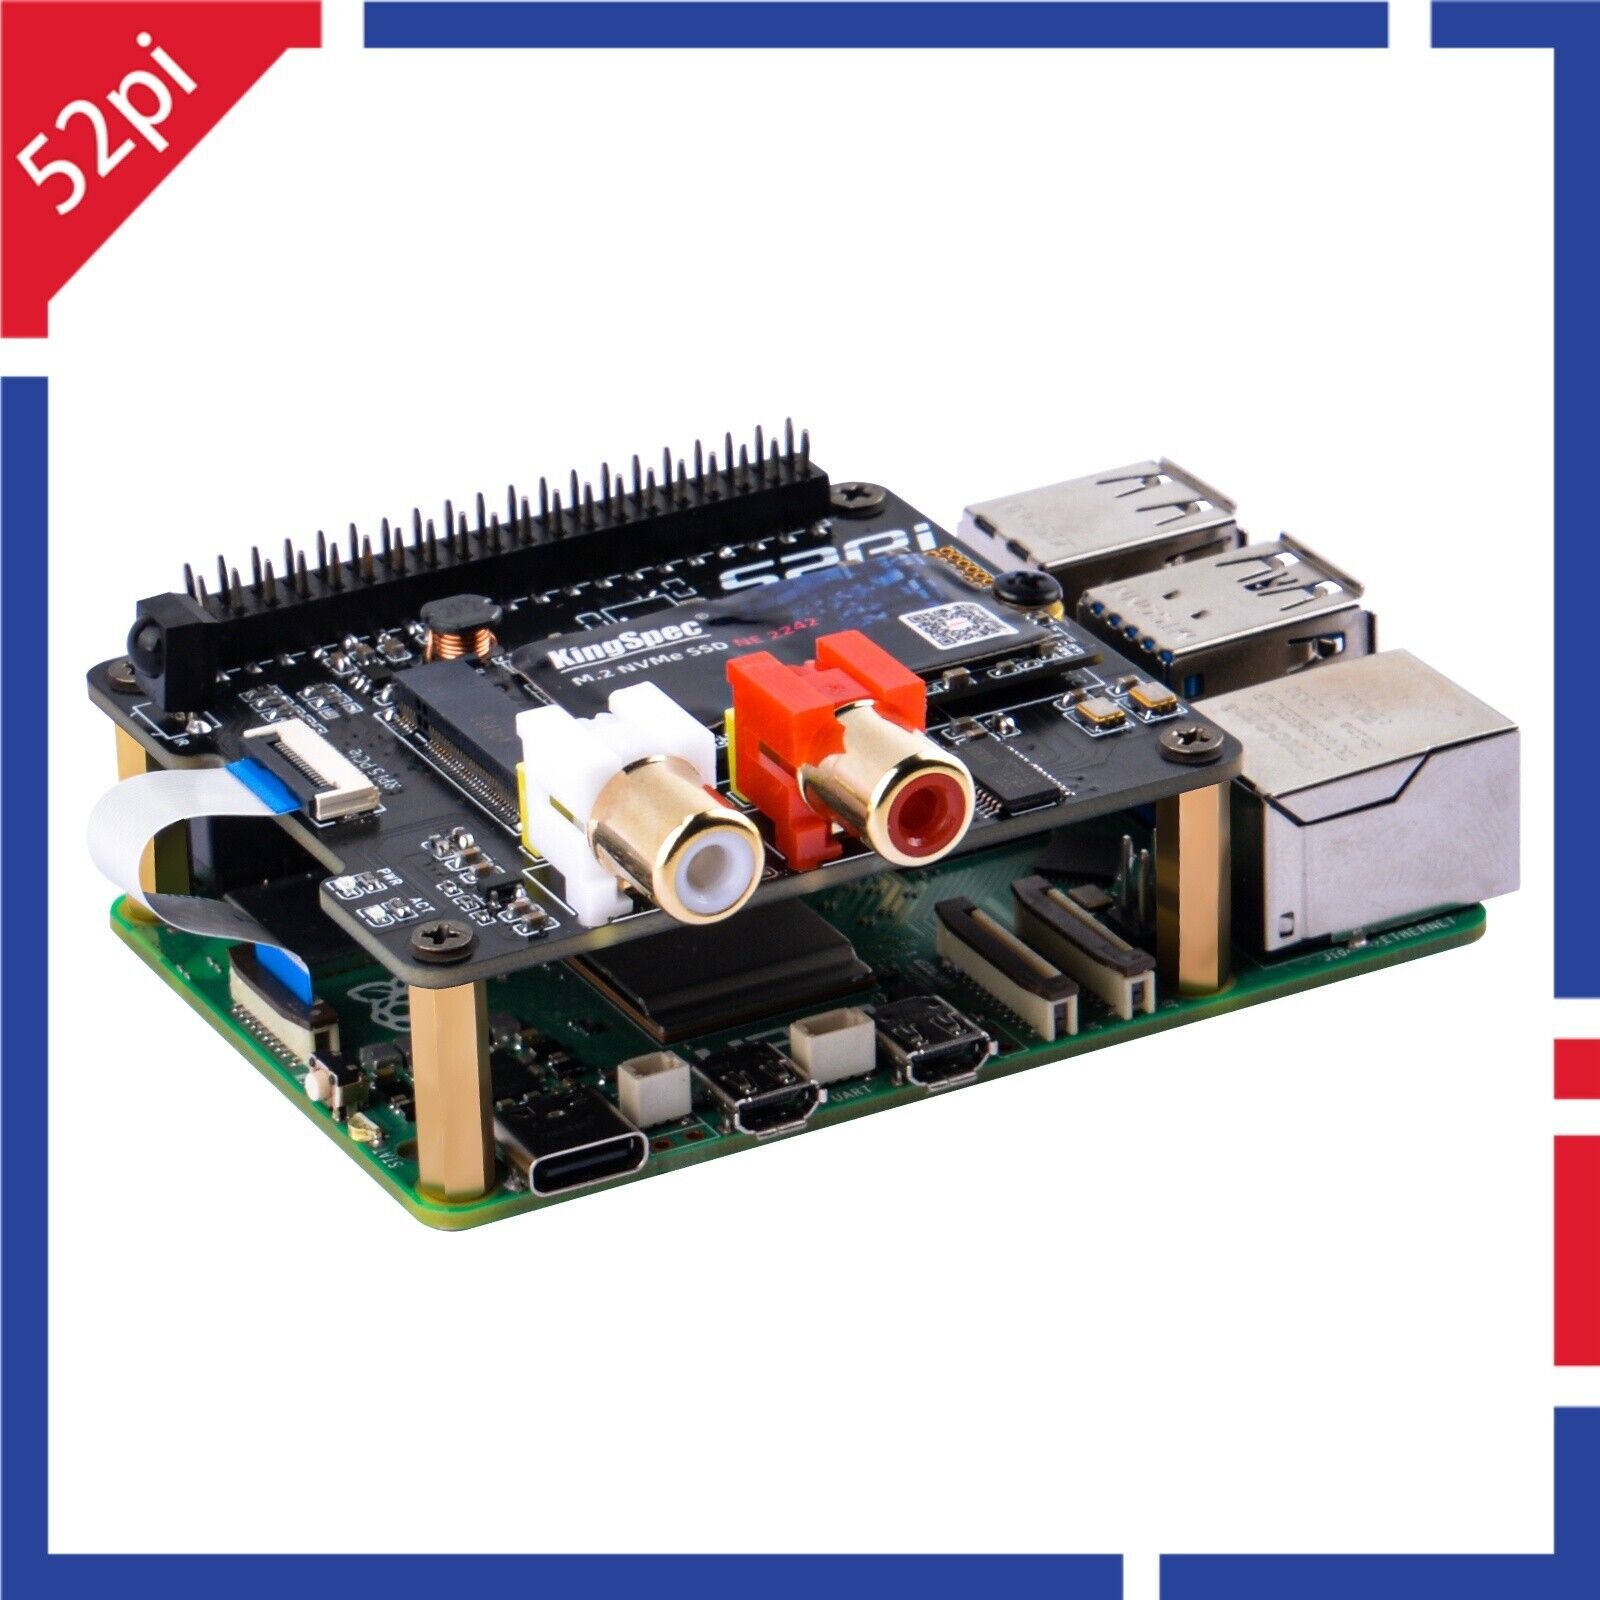 NVDAC HAT Expansion Board for Raspberry Pi 5 DAC Standard and PCIe to NVMe SSD